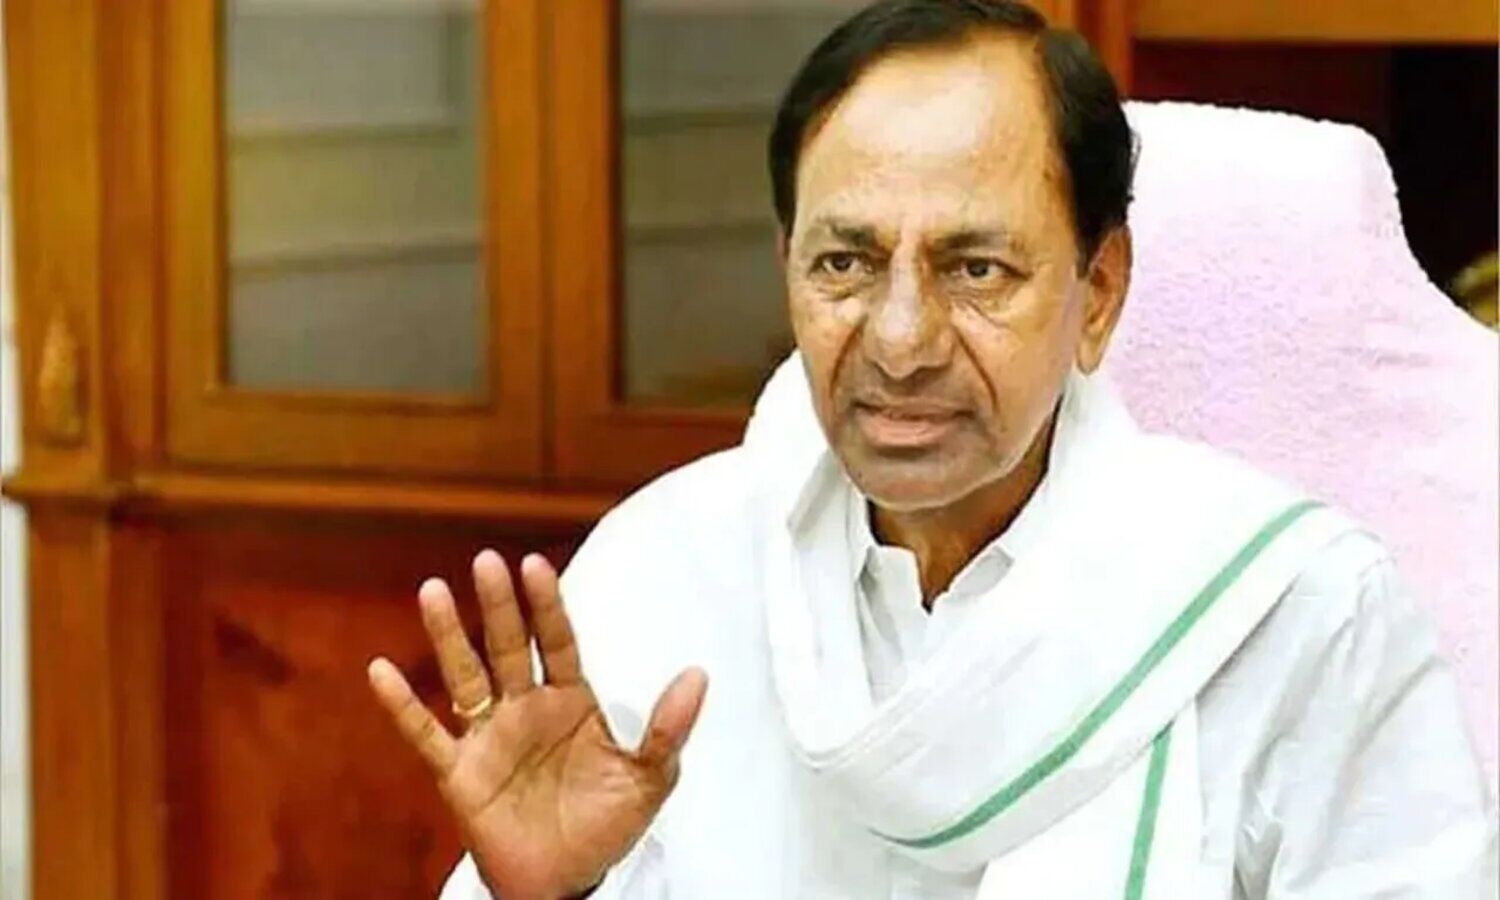 KCR Mission 2024: KCR preparing to enter national politics, promised free electricity to farmers